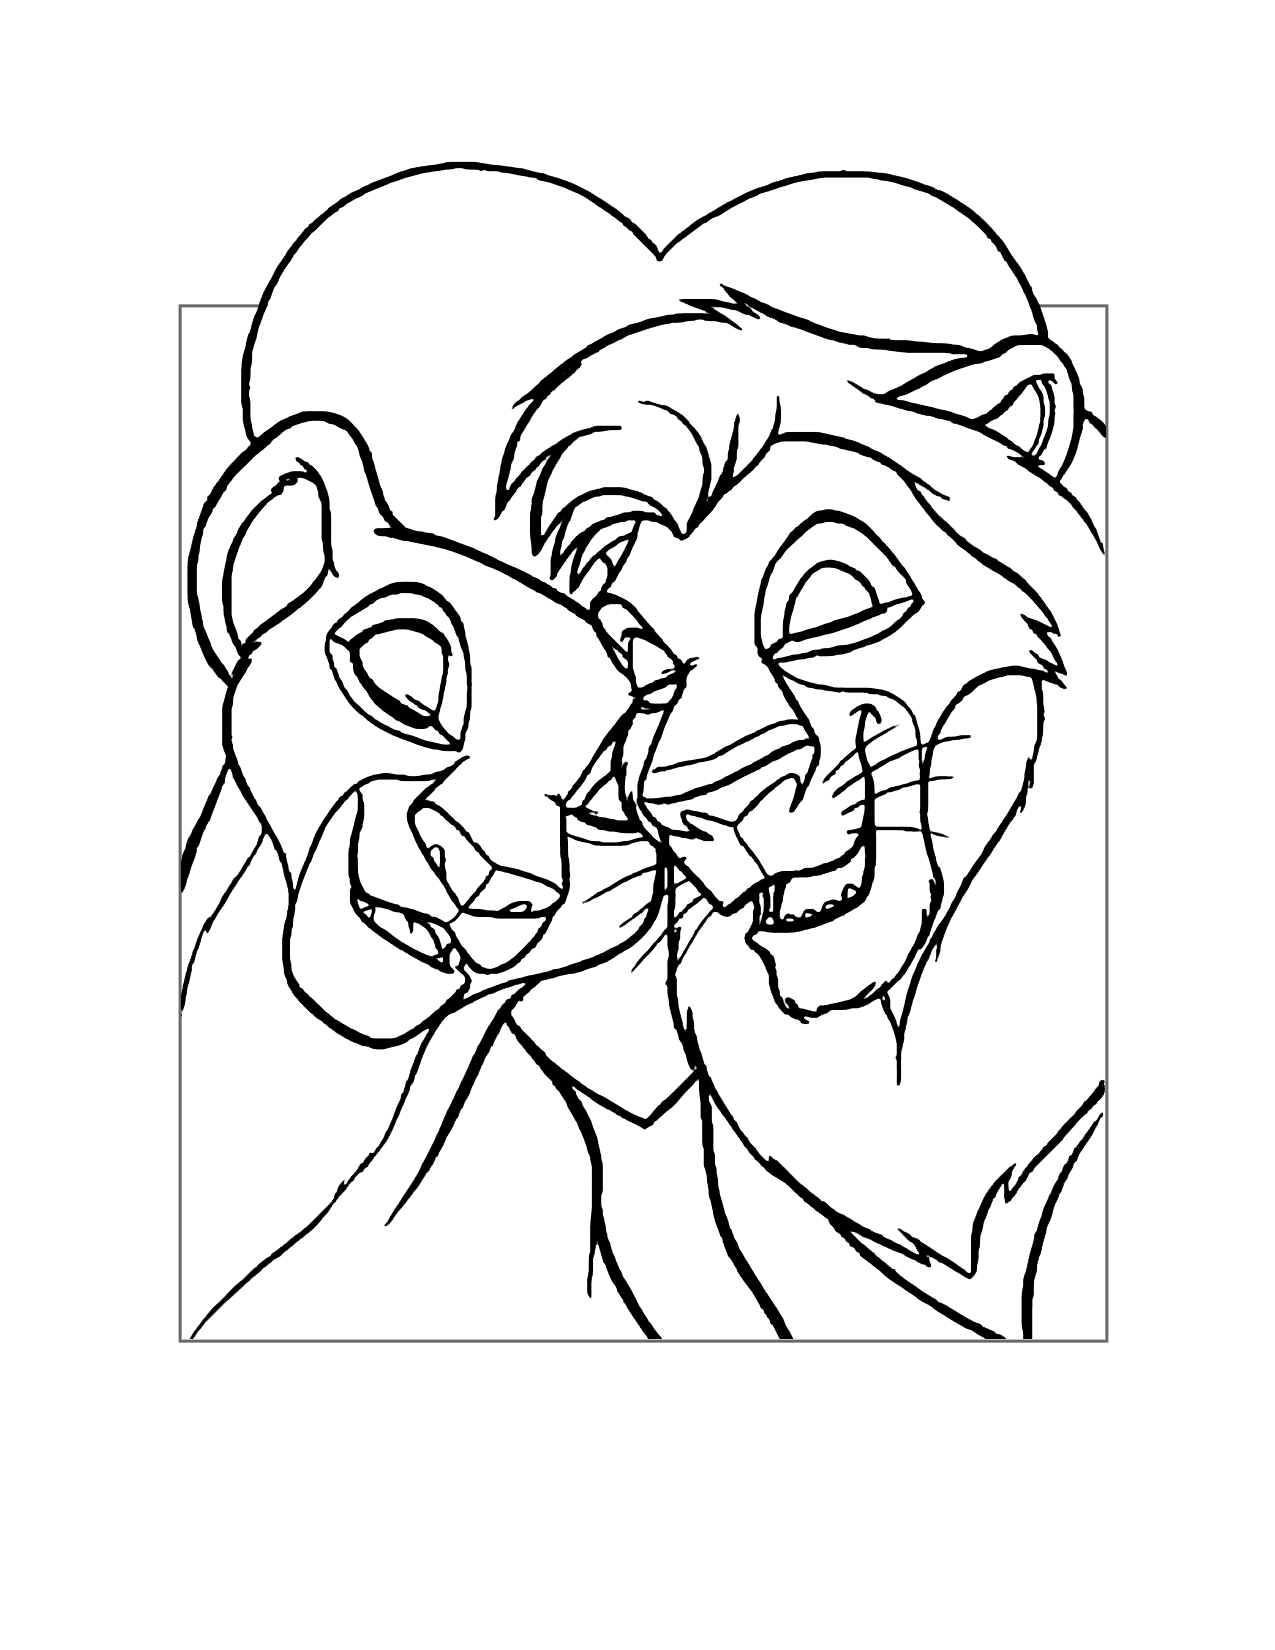 Nala And Simba Fall In Love Coloring Page